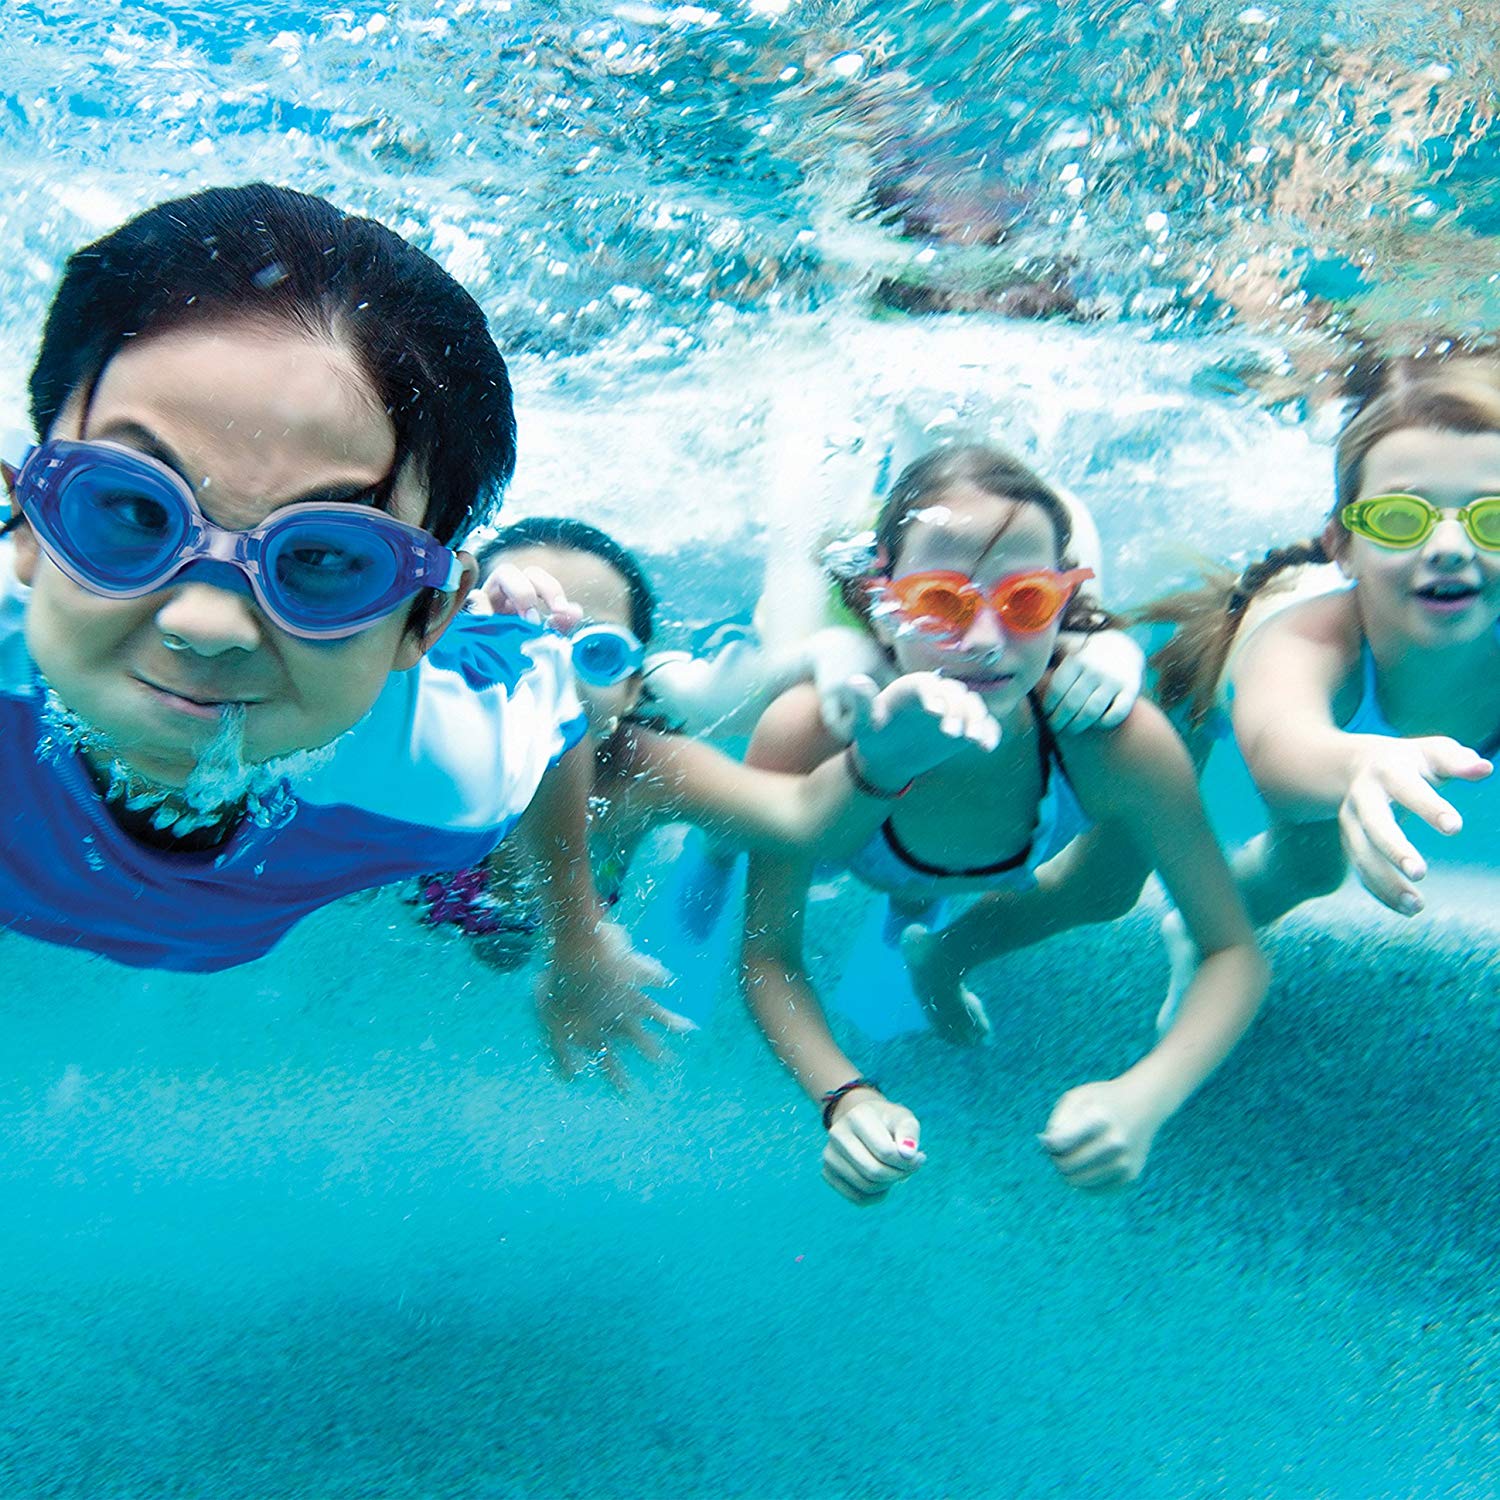 Swimming activities. Kids Pool Party. Go swimming. Go swimming картинка. Kids Pool Water.